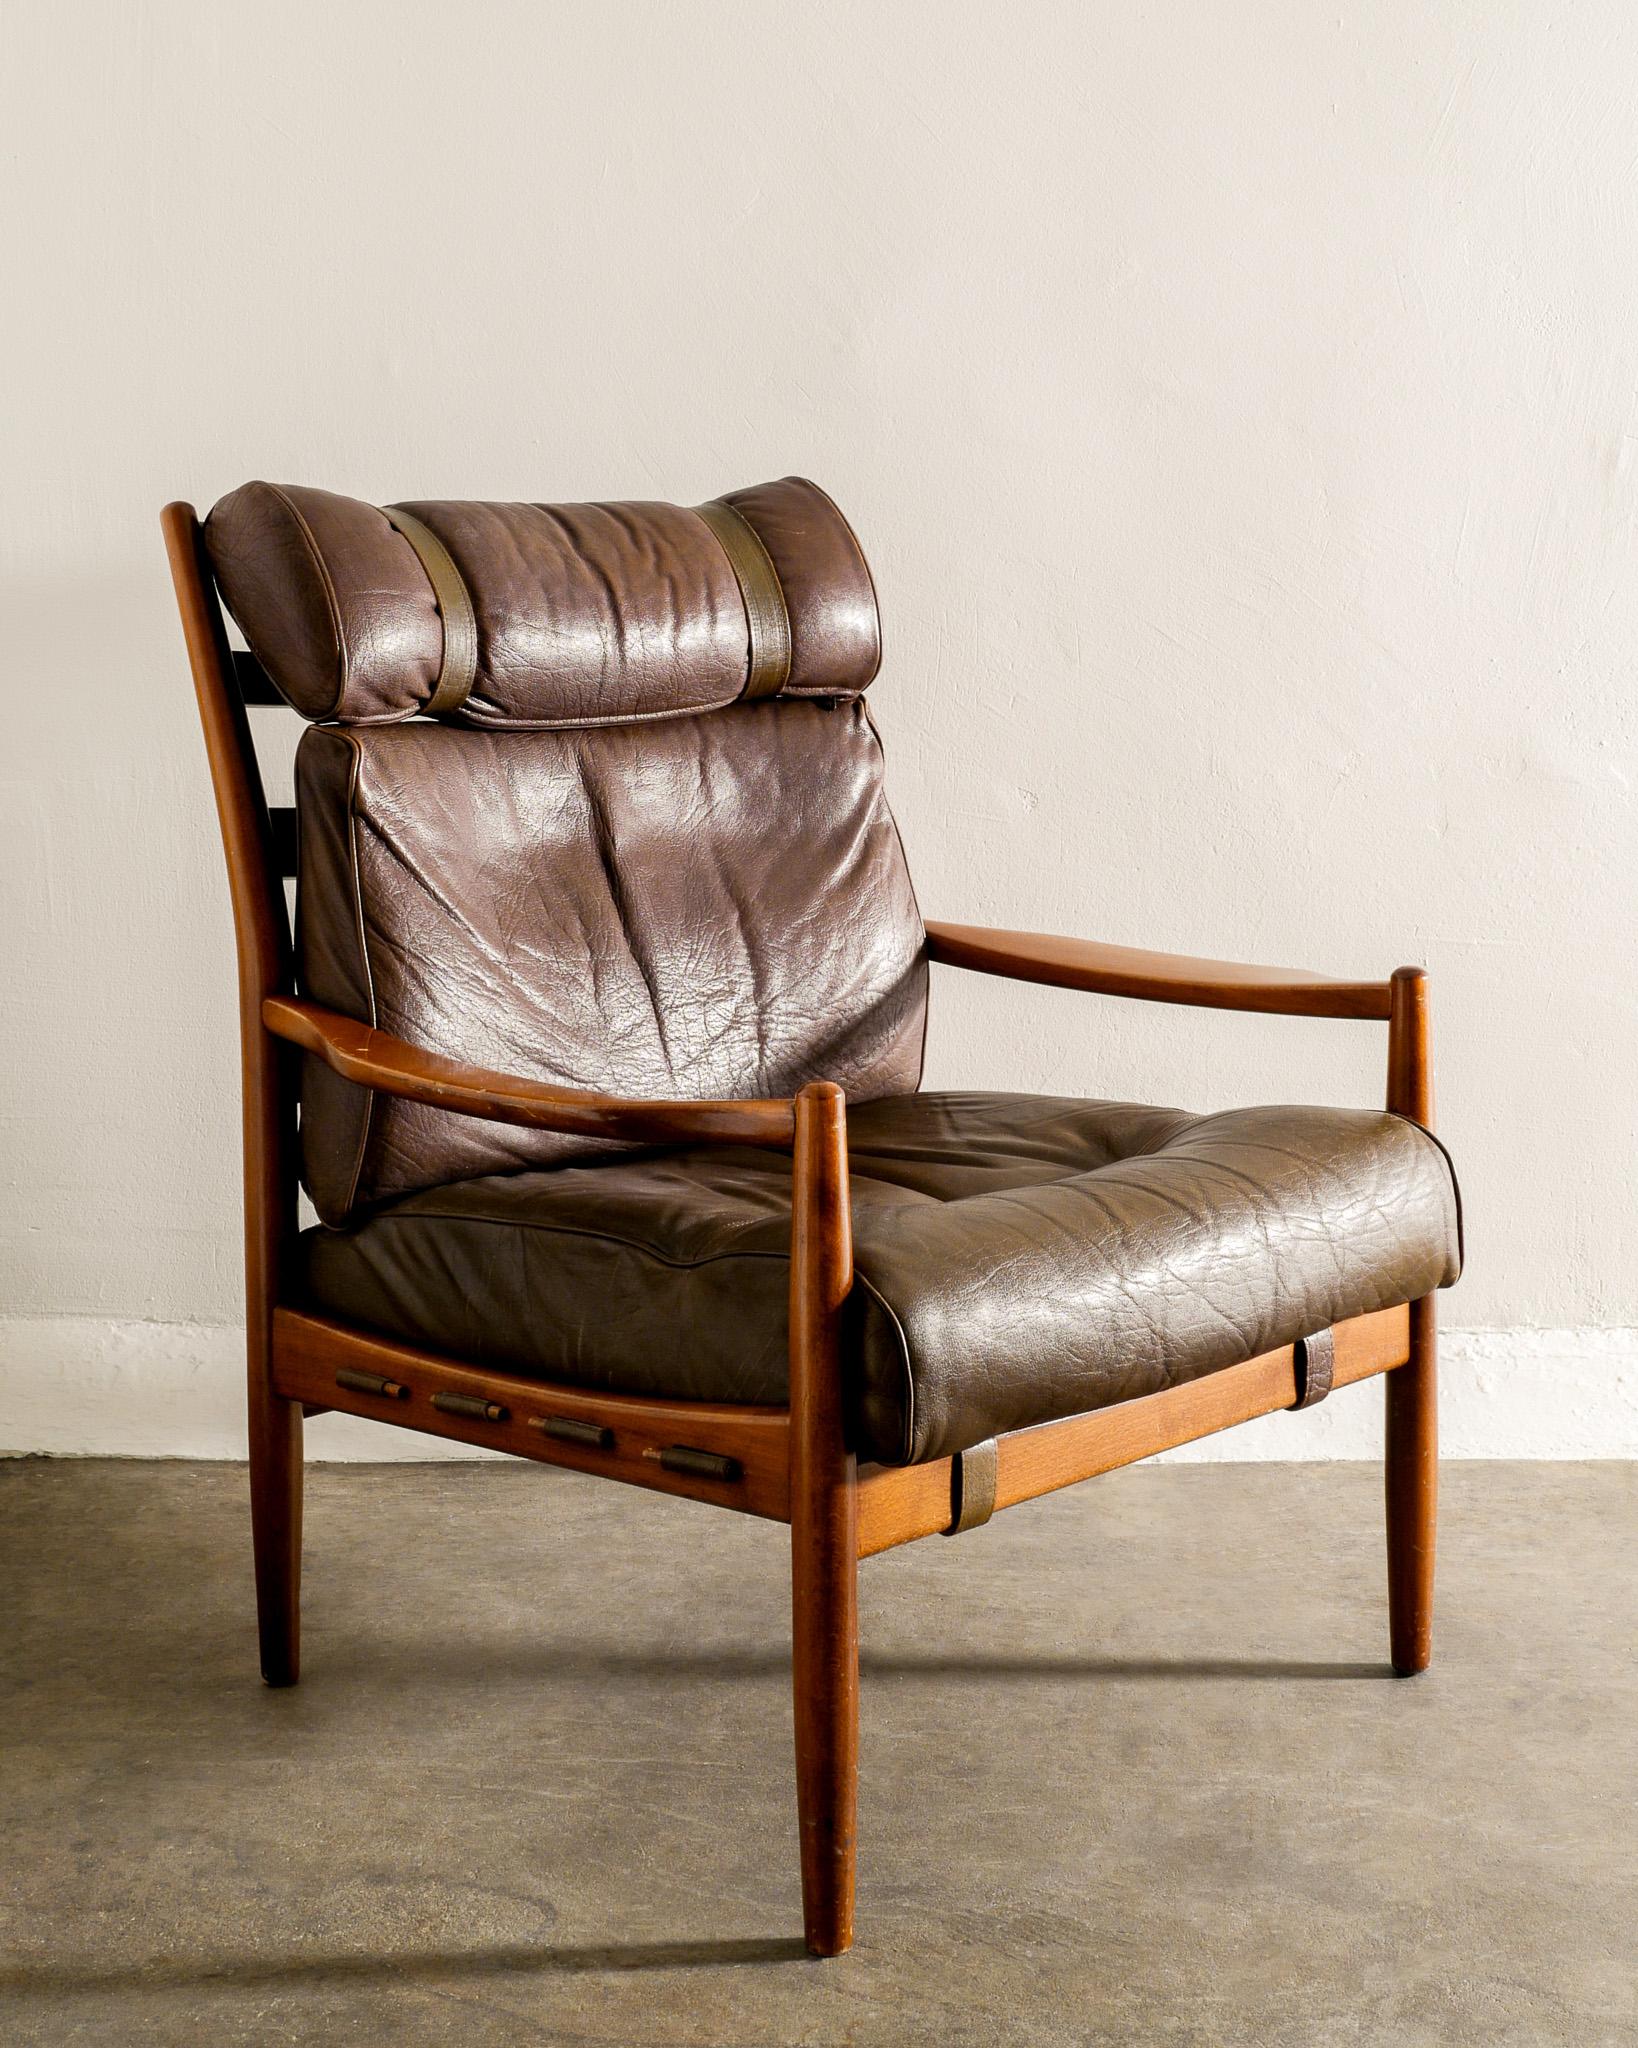 Rare mid century armchair in thick, patinated, well preserved buffalo leather and walnut in style of Arne Norell produced in Sweden 1950s. Good original condition. 

Dimensions: H: 90 cm / 35.5